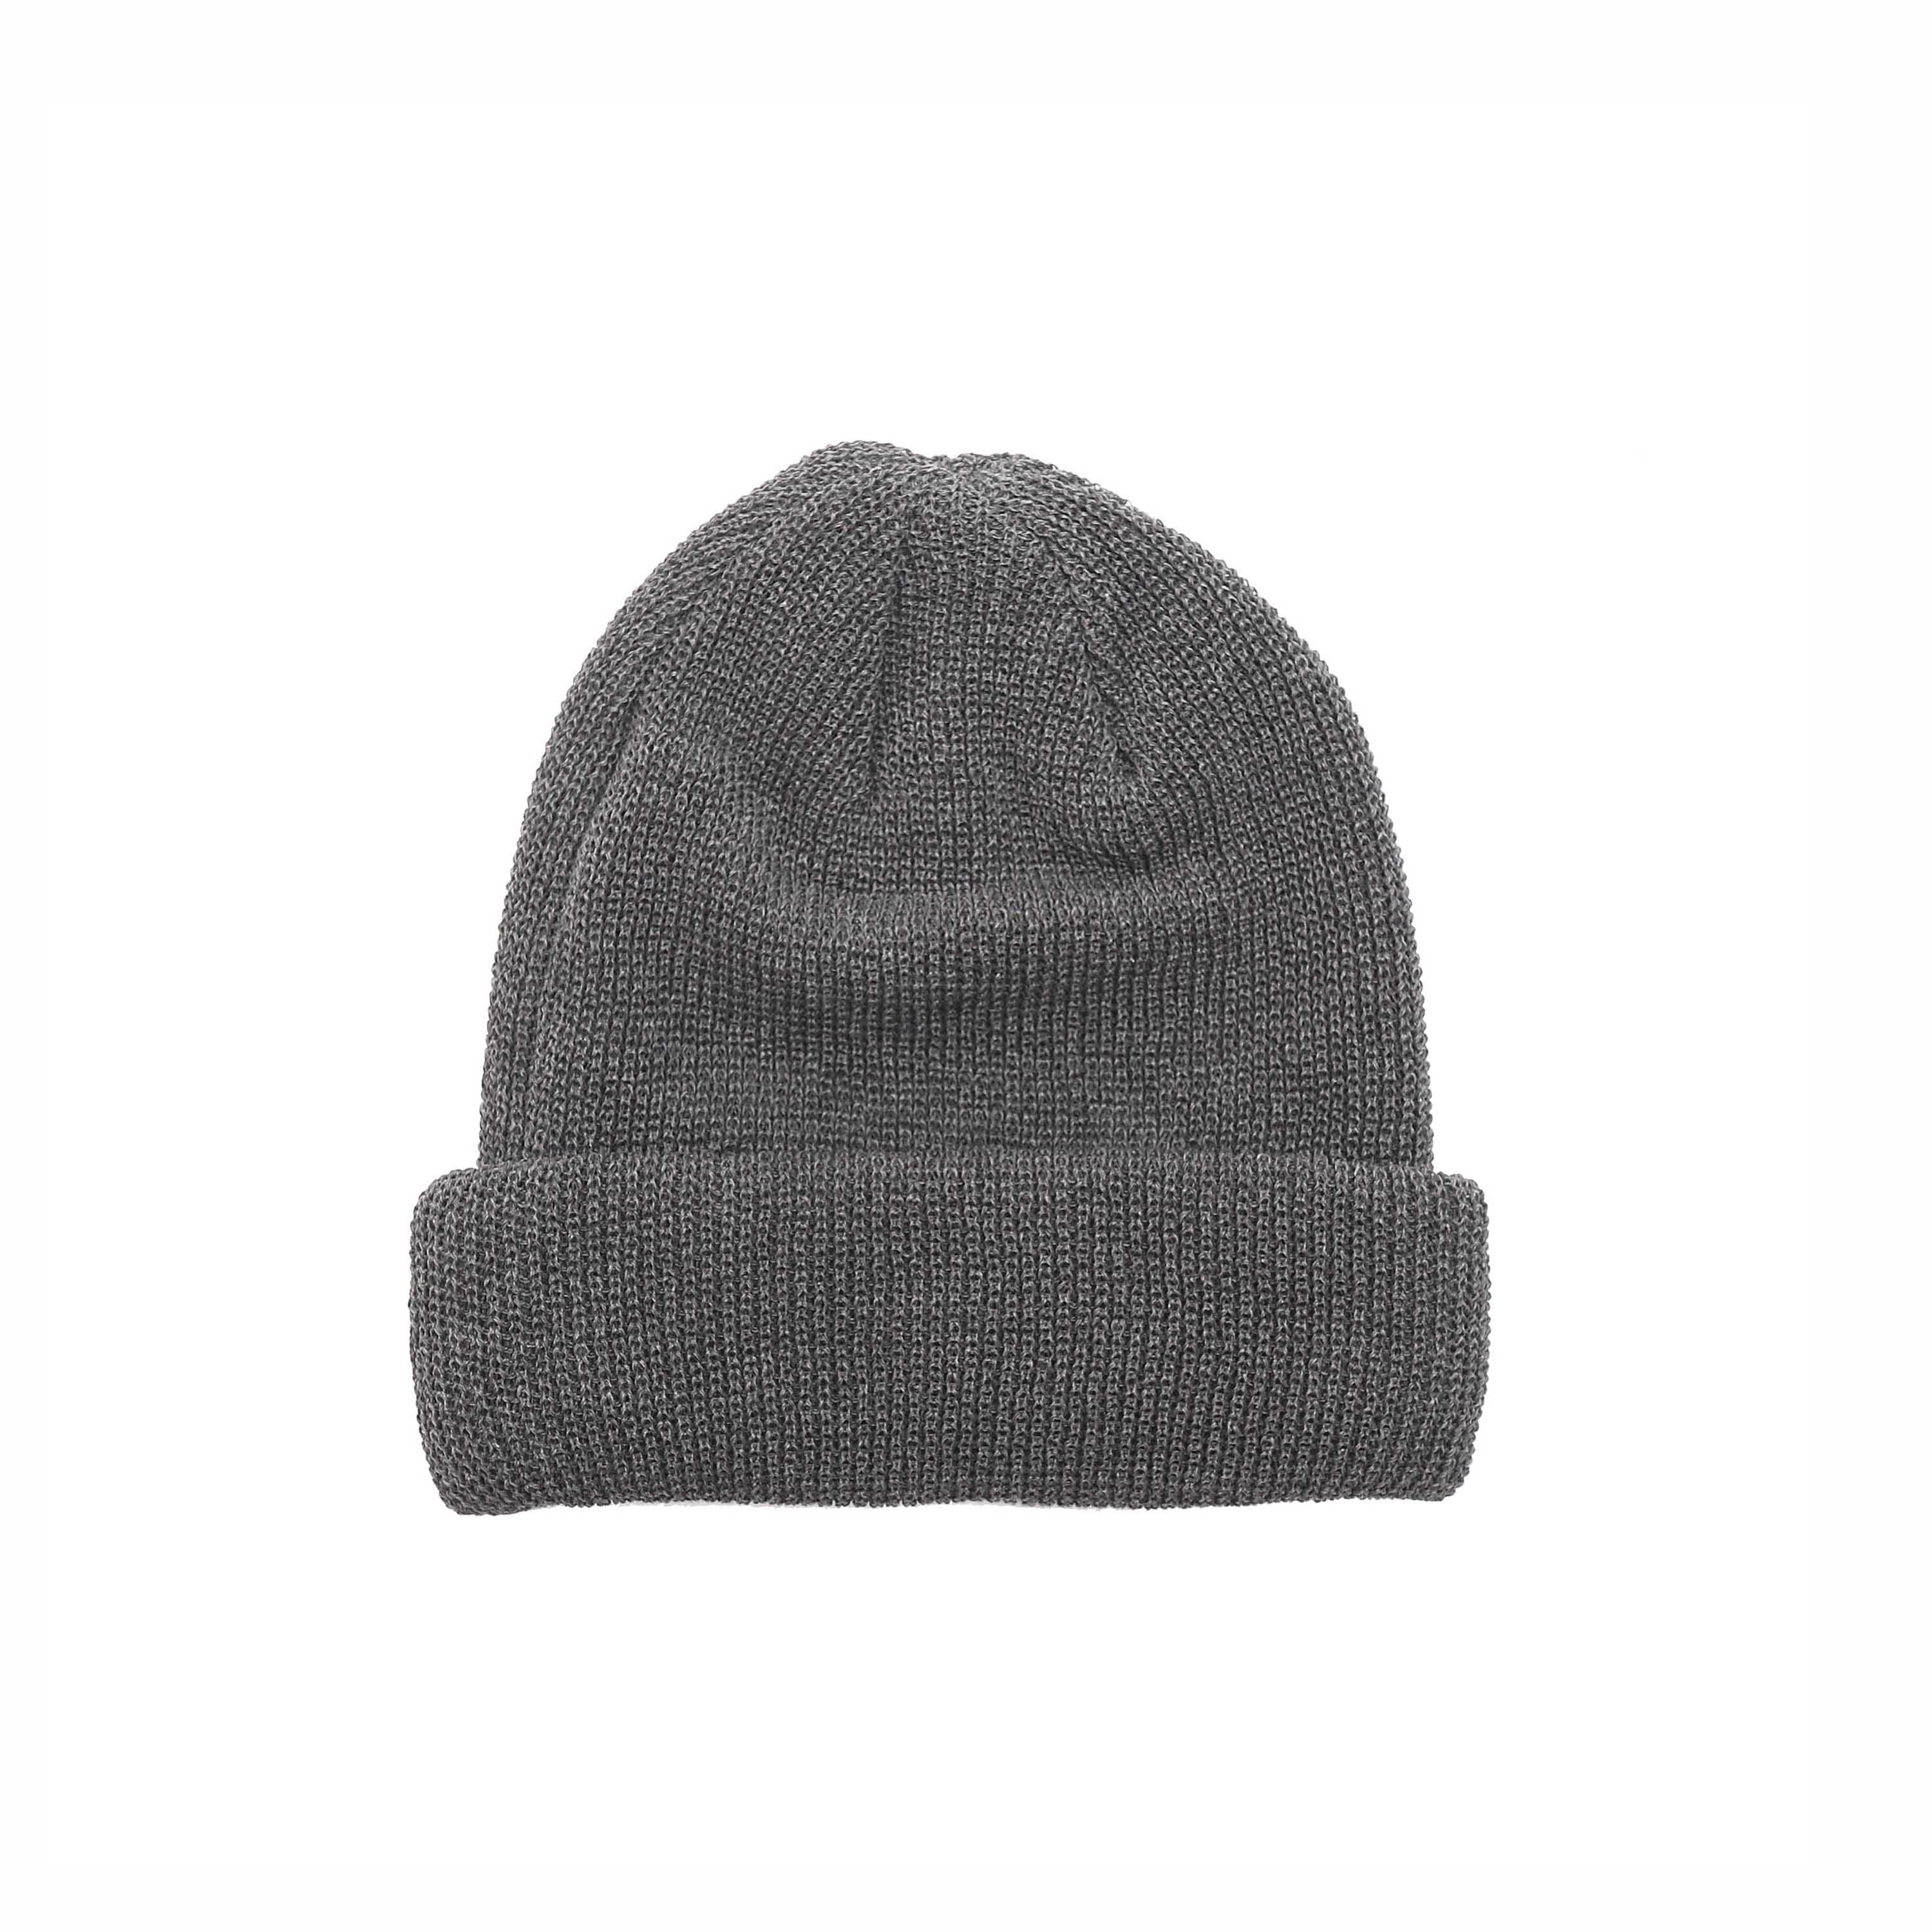 SOUTH FORK COTTON KNIT CAP - STEEL GRAY